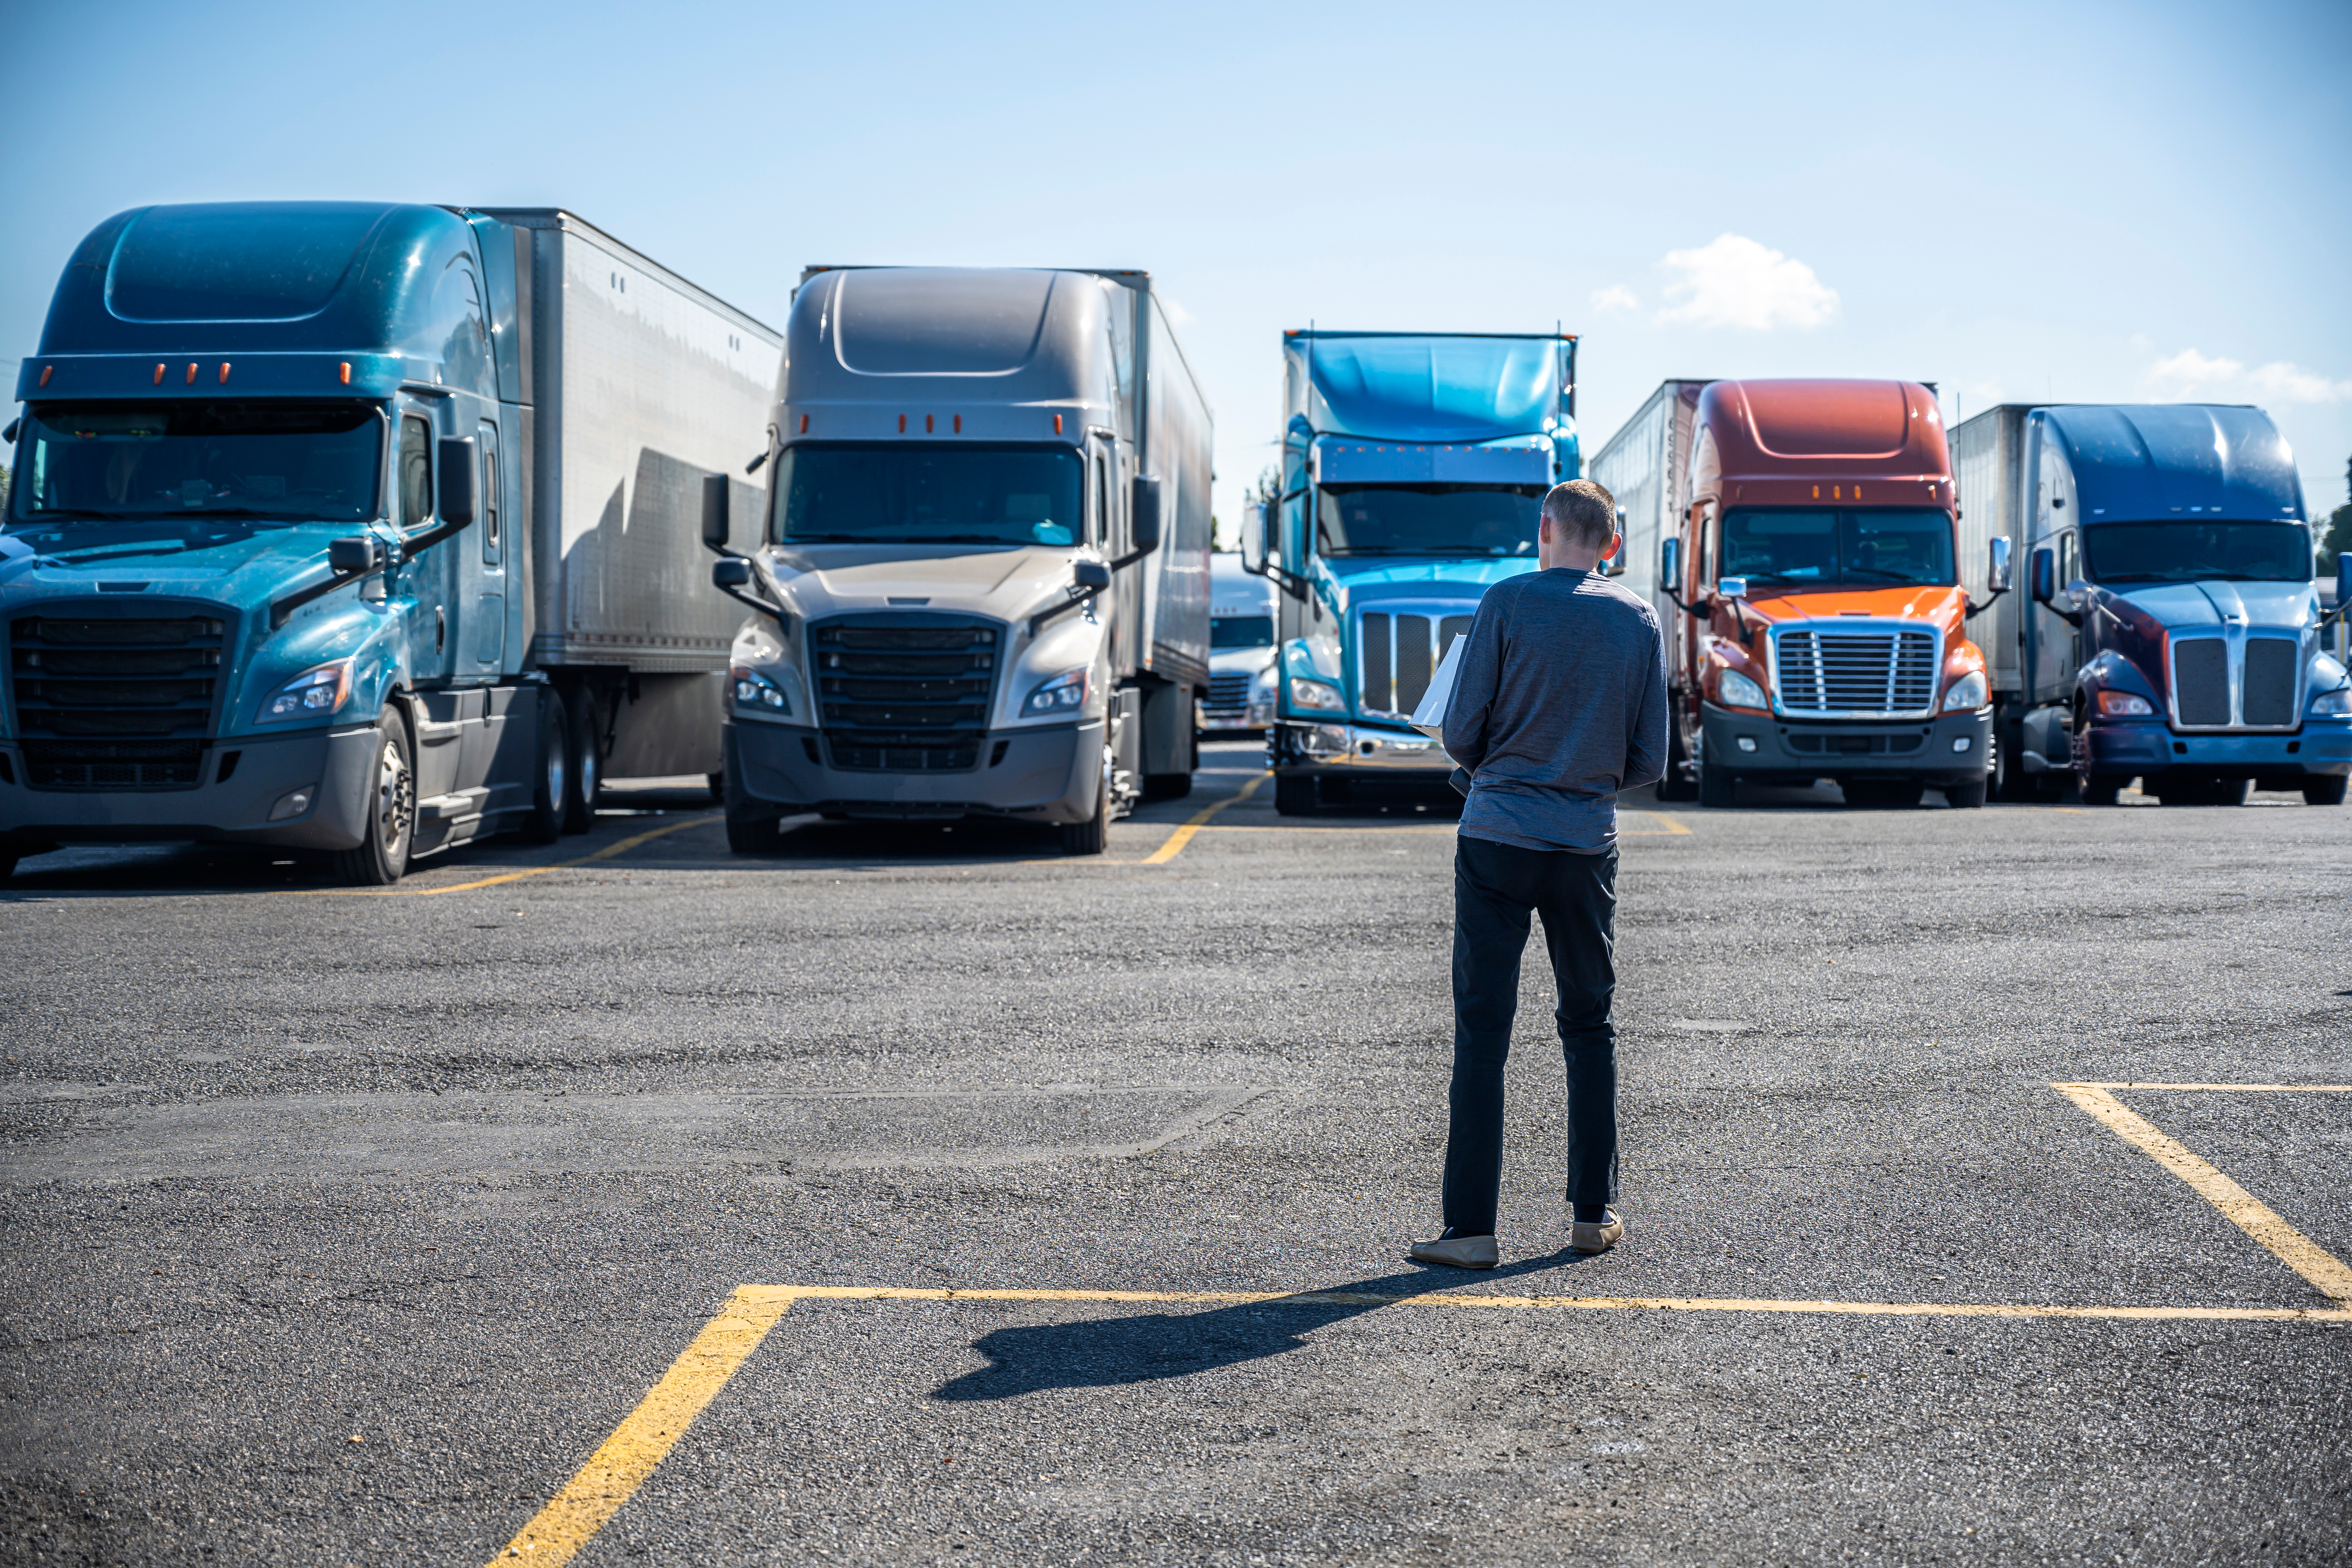 Who Can You Claim Damages From After a Semi Truck Accident?